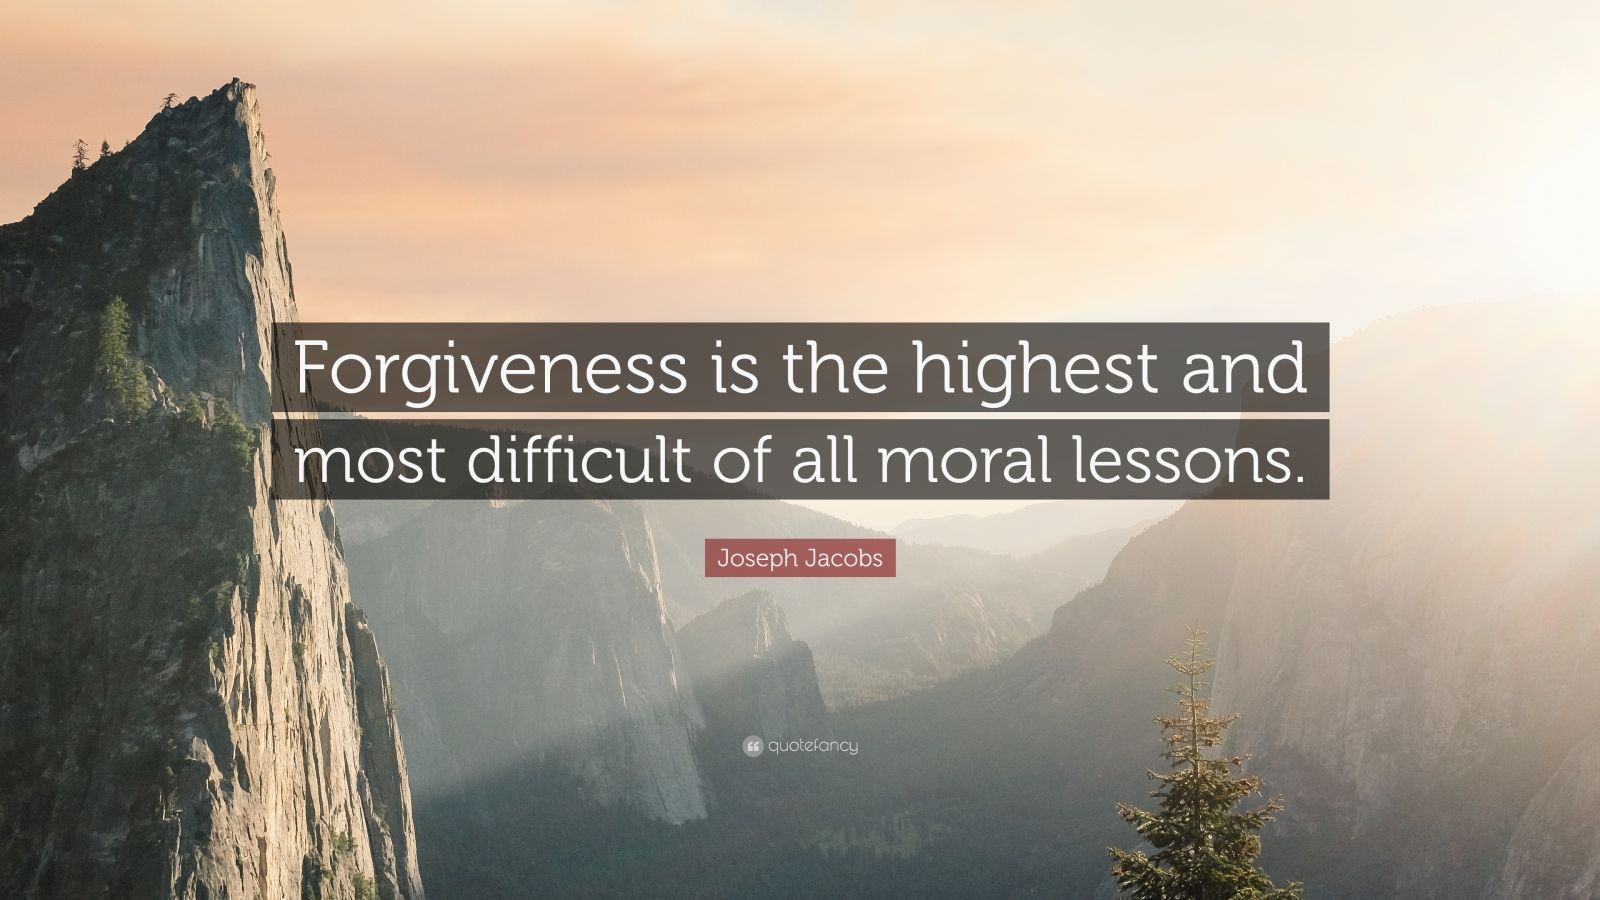 Joseph Jacobs Quote: “Forgiveness is the highest and most difficult of